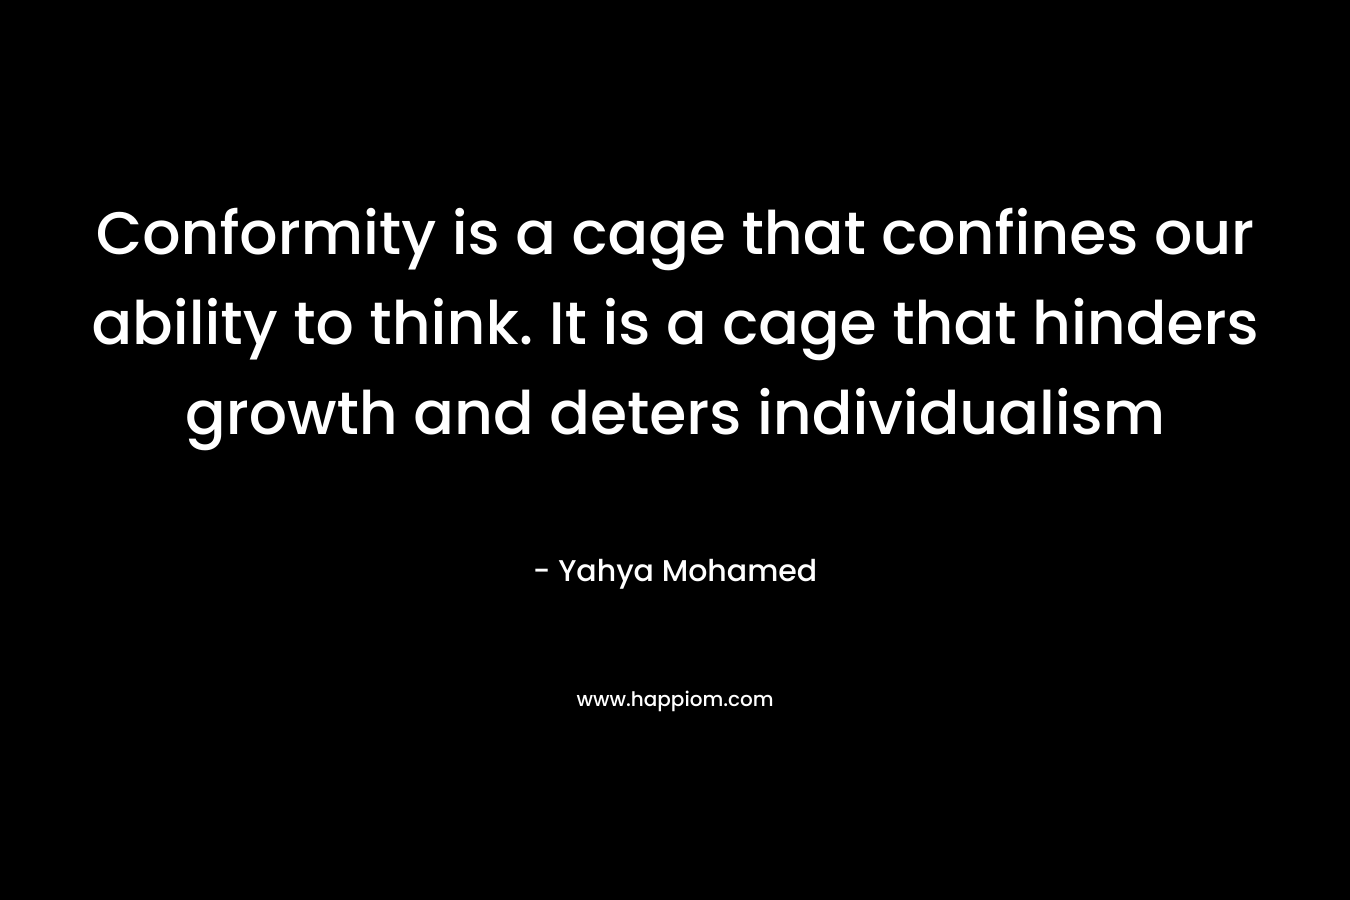 Conformity is a cage that confines our ability to think. It is a cage that hinders growth and deters individualism – Yahya Mohamed